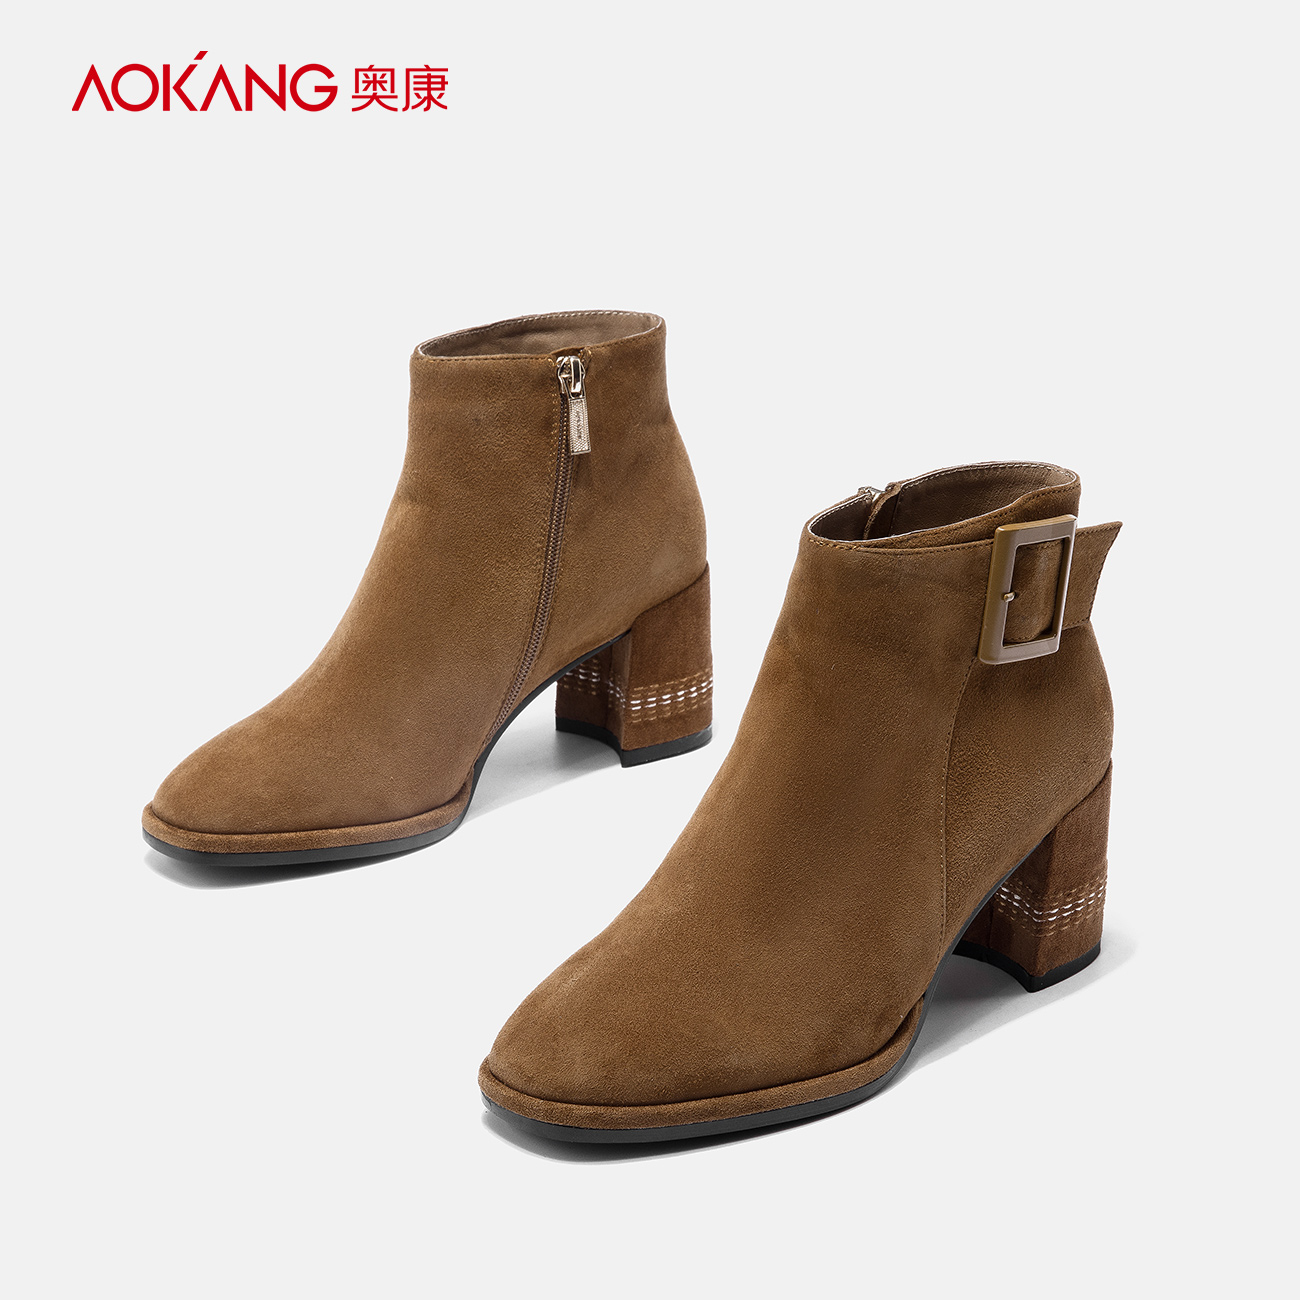 Aokang women's shoes Winter Fashion Square buckled Suede Boots leisure pointed thick heel boots